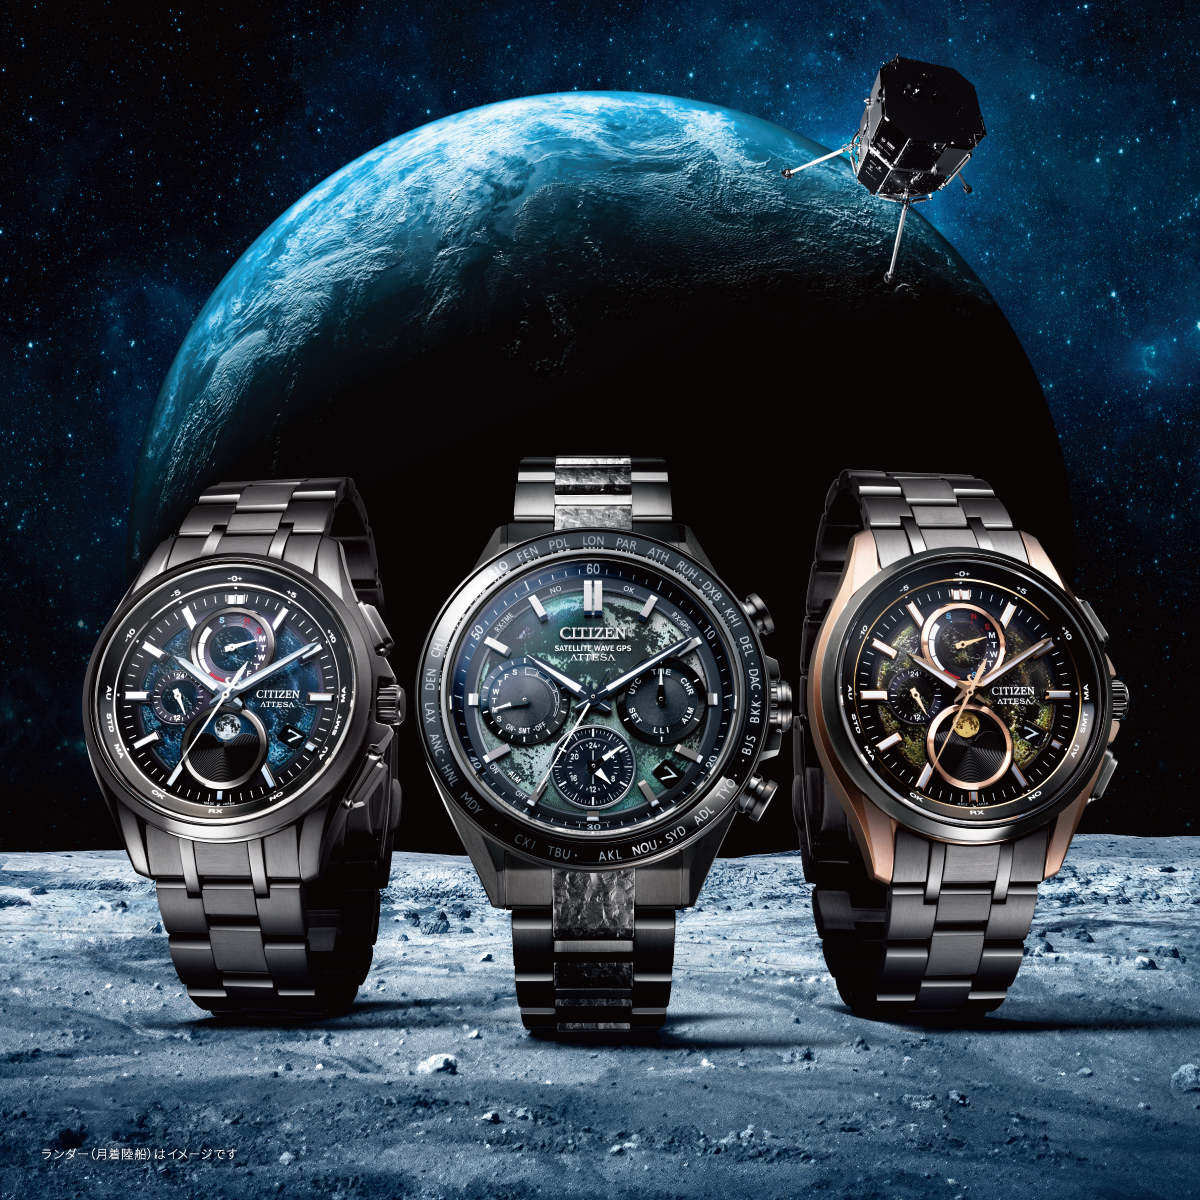 Citizen Attessa new watches made in collaboration with space.